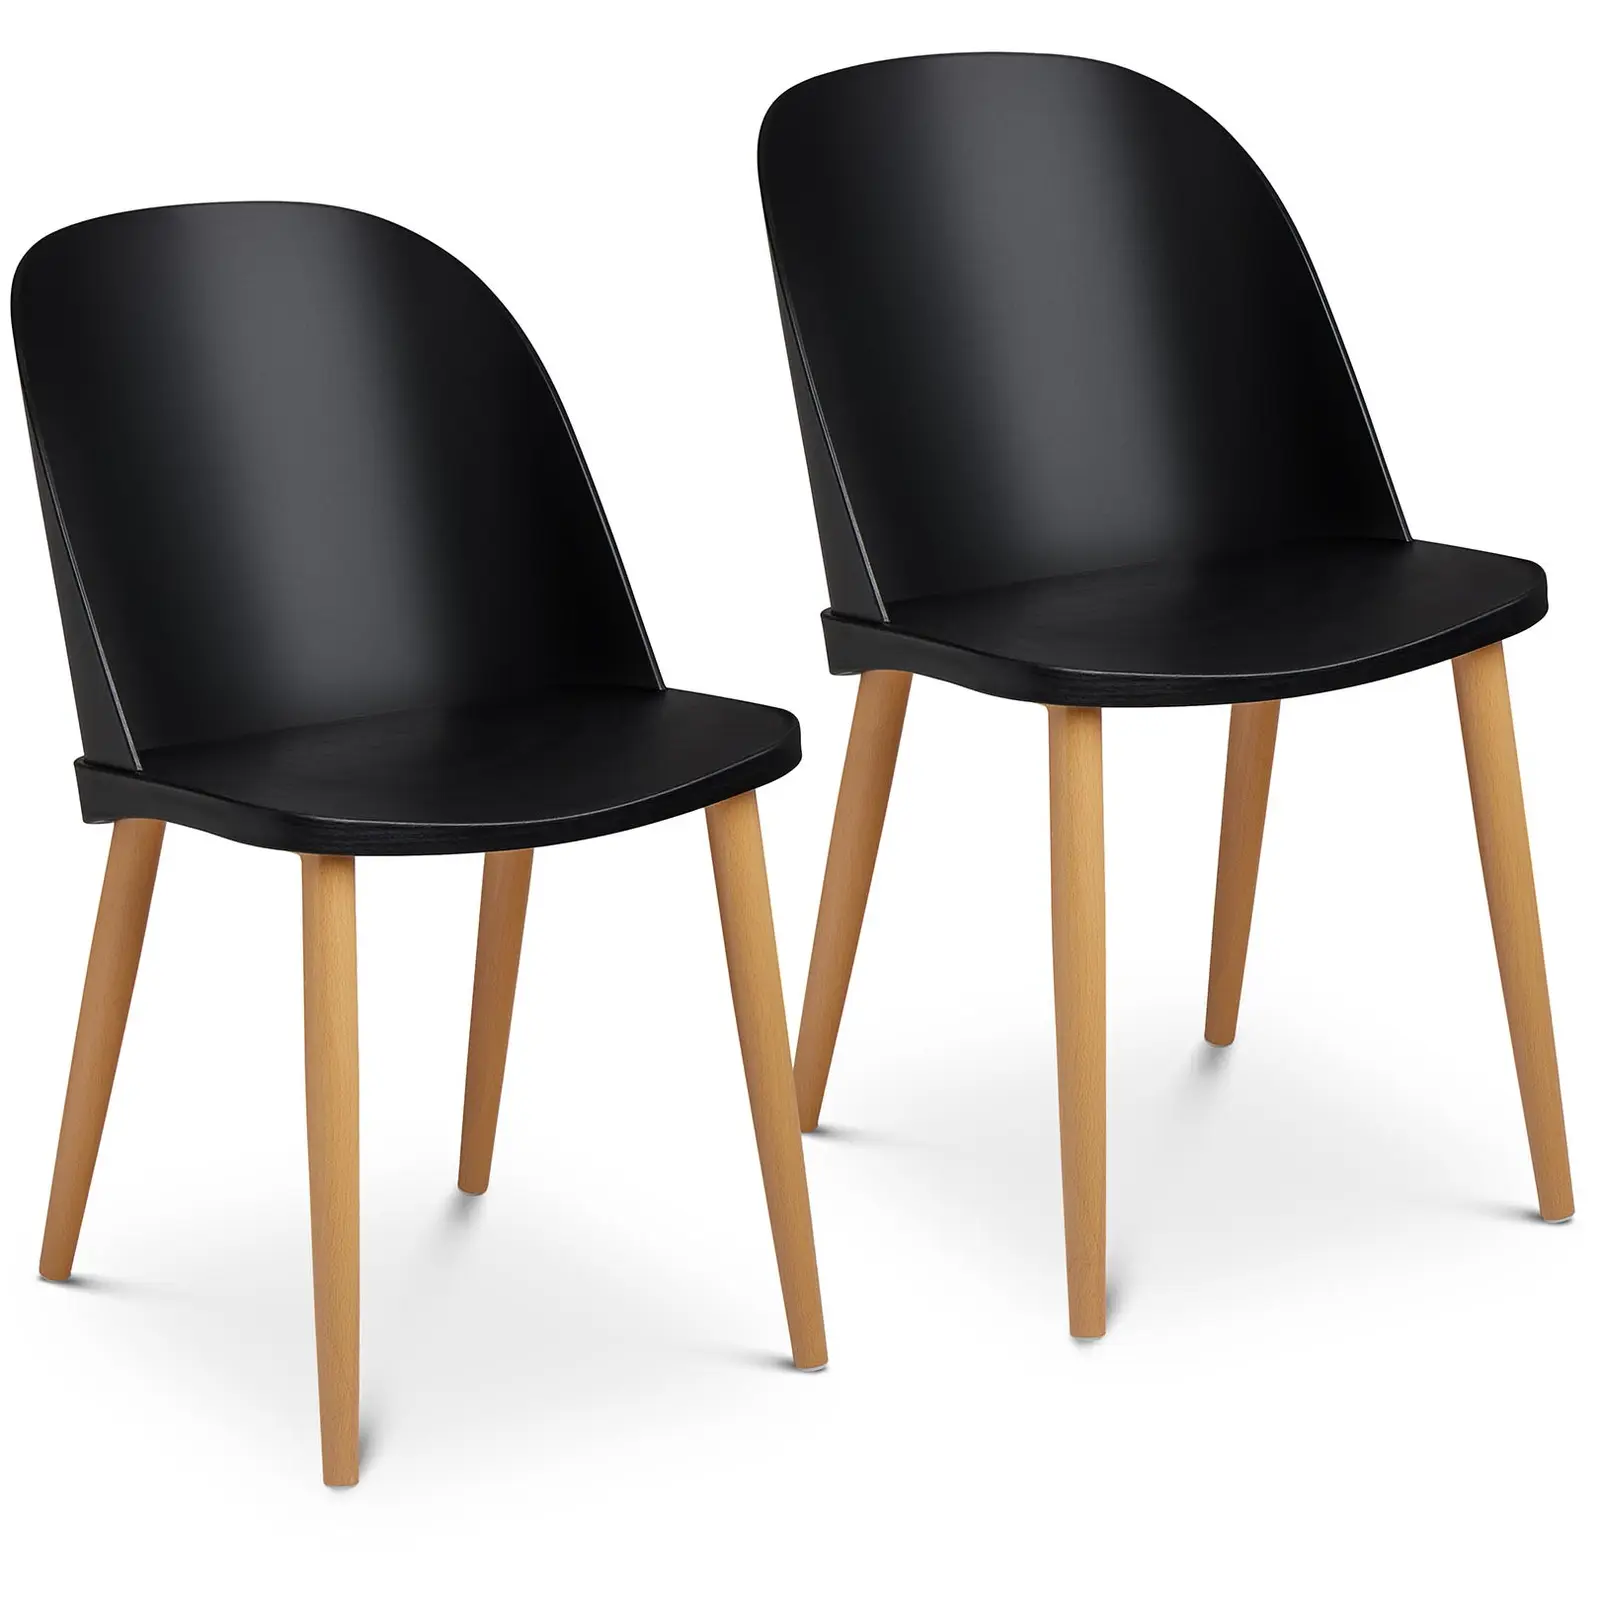 Chair - set of 2 - up to 150 kg - seat 43.5 x 43 cm - black - transparent back